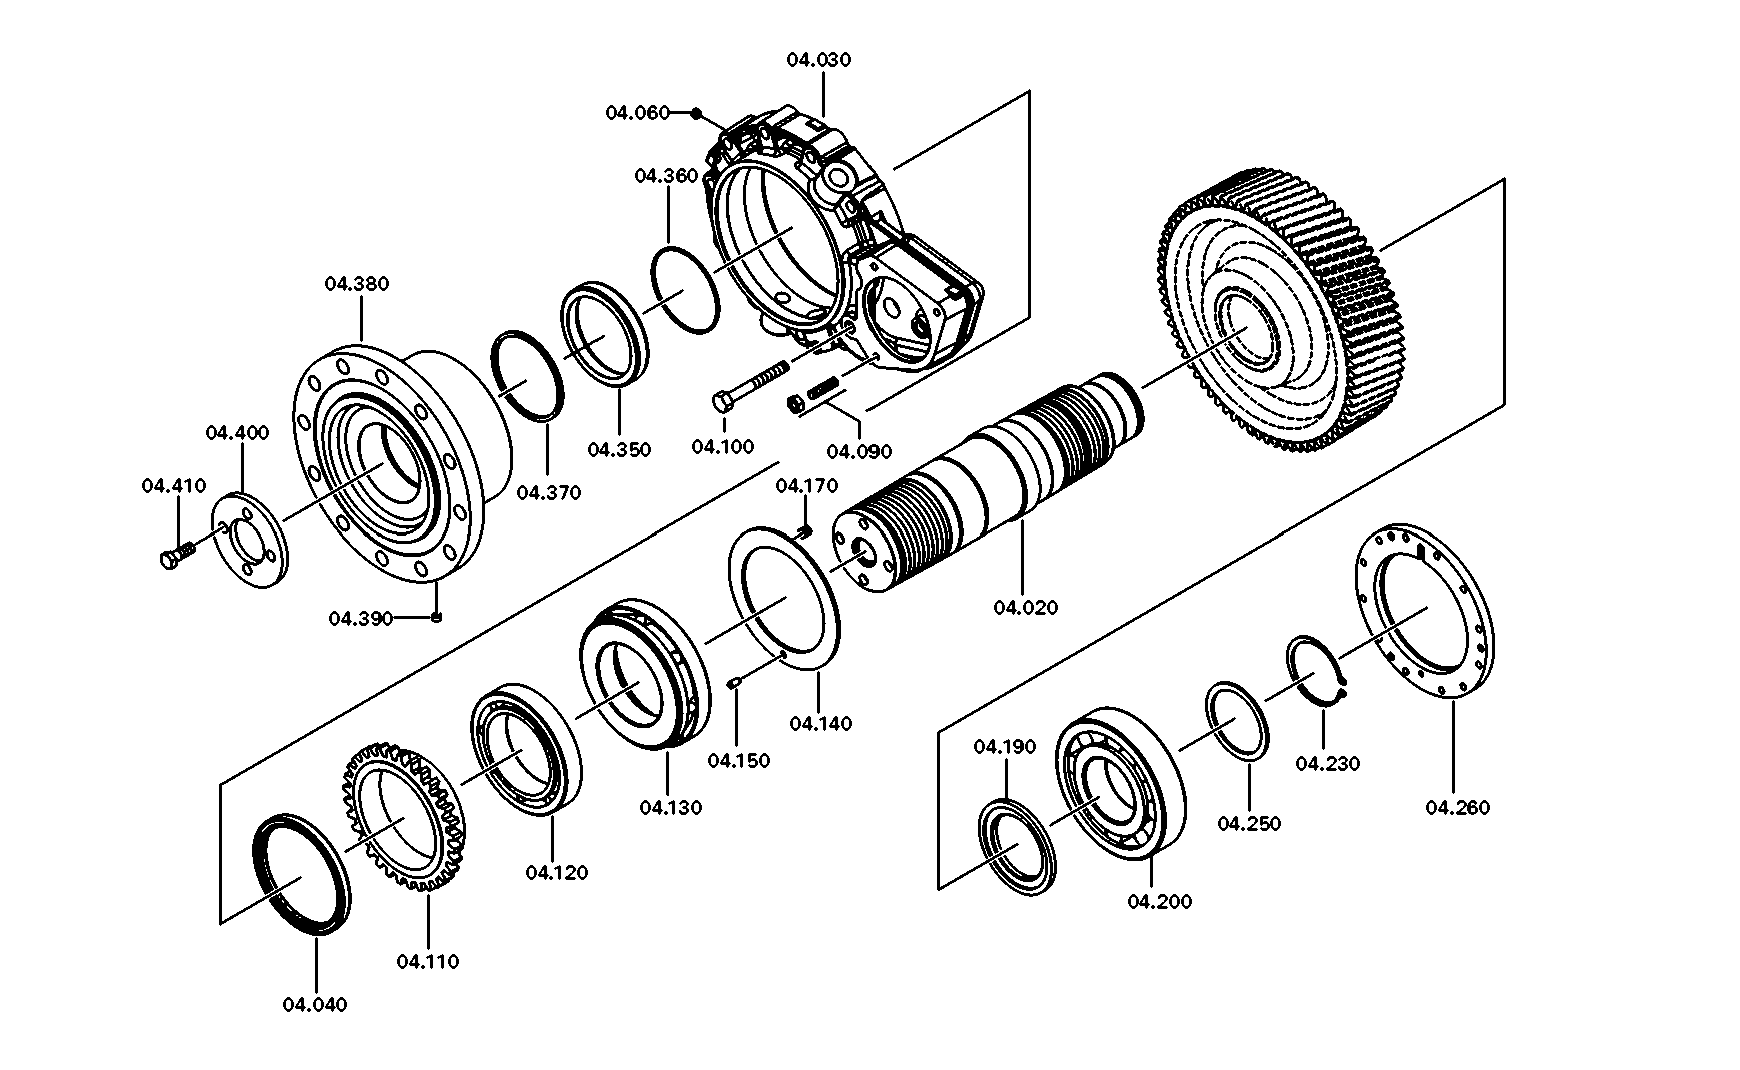 drawing for Astra Veicoli Industriali 0000000133842 - SHAFT SEAL (figure 5)